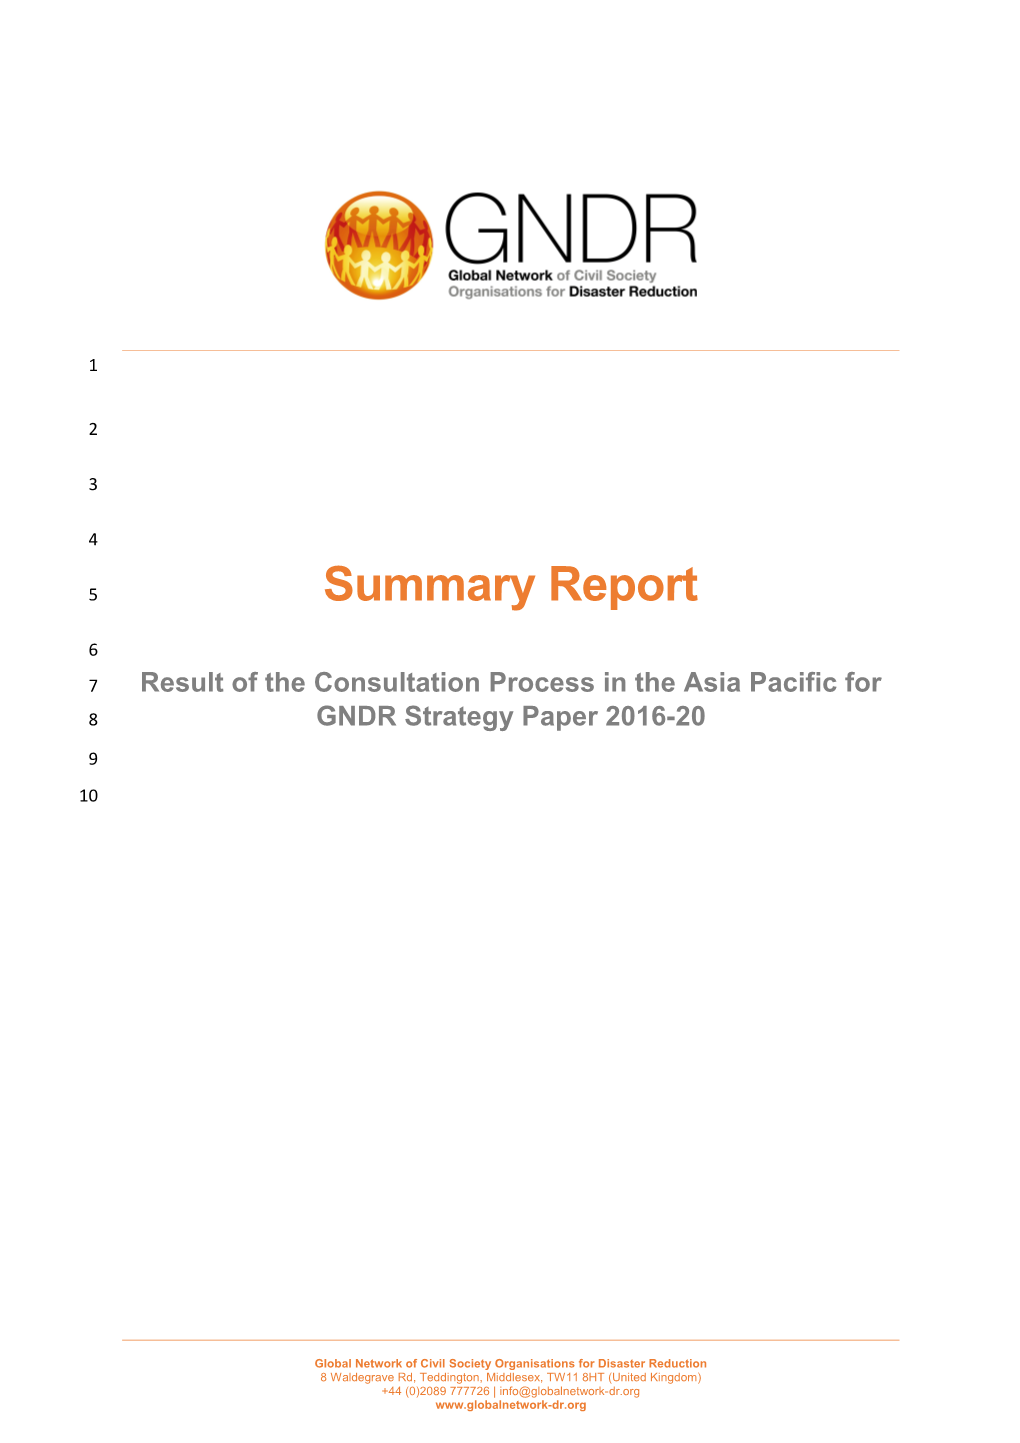 Result of the Consultation Process in the Asia Pacific for GNDR Strategy Paper 2016-20